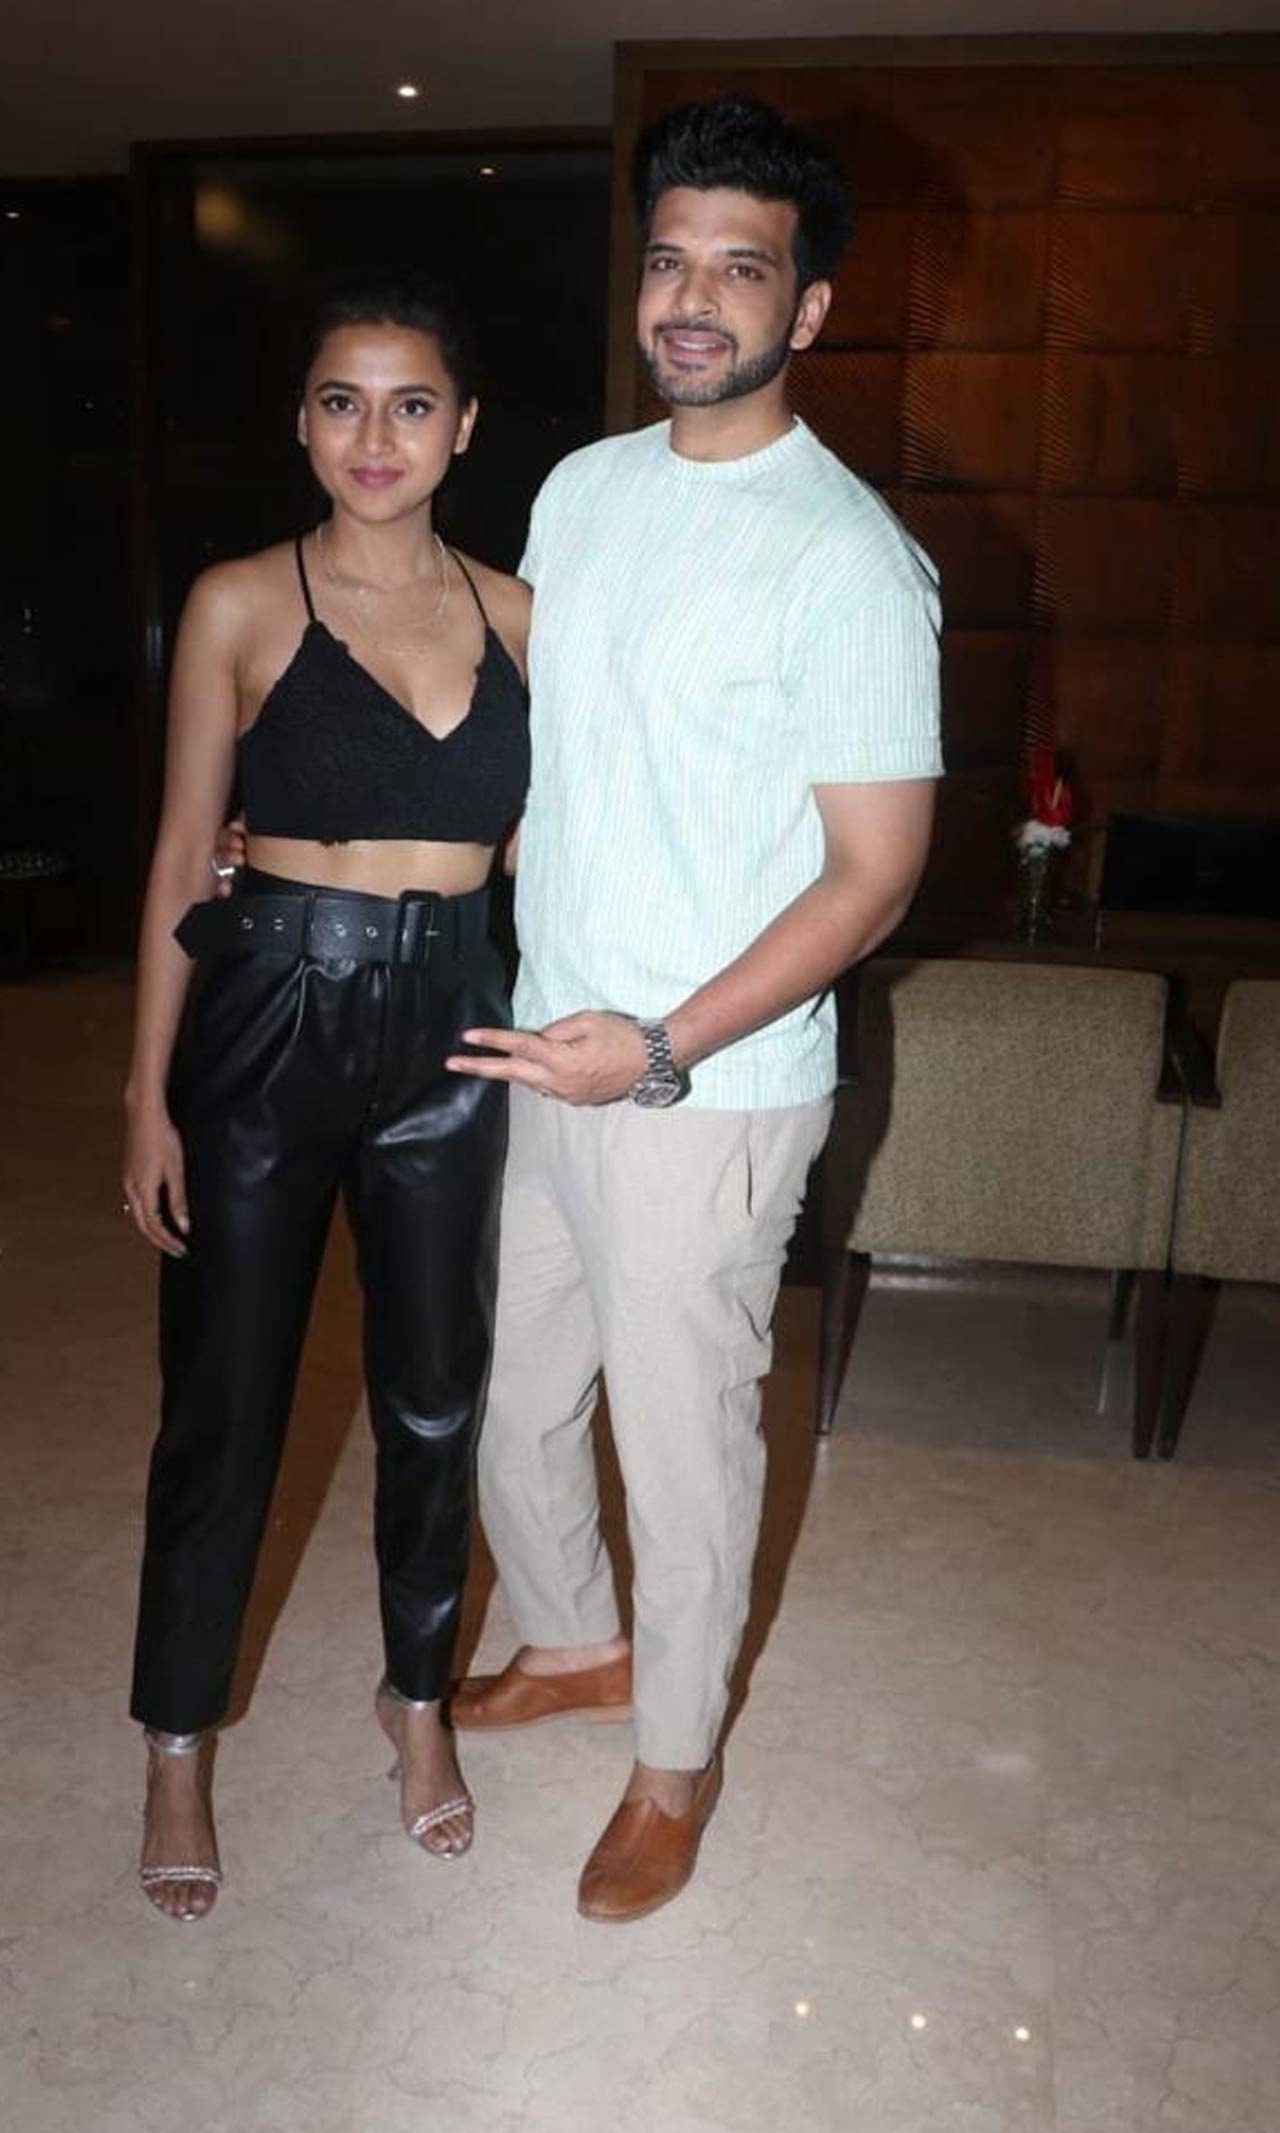 Tejasswi Prakash, Karan Kundrra changed their outfit for the occasion and looked all the more stylish. Tejasswi then arrived in a stylish black dress to celebrate her 29th birthday